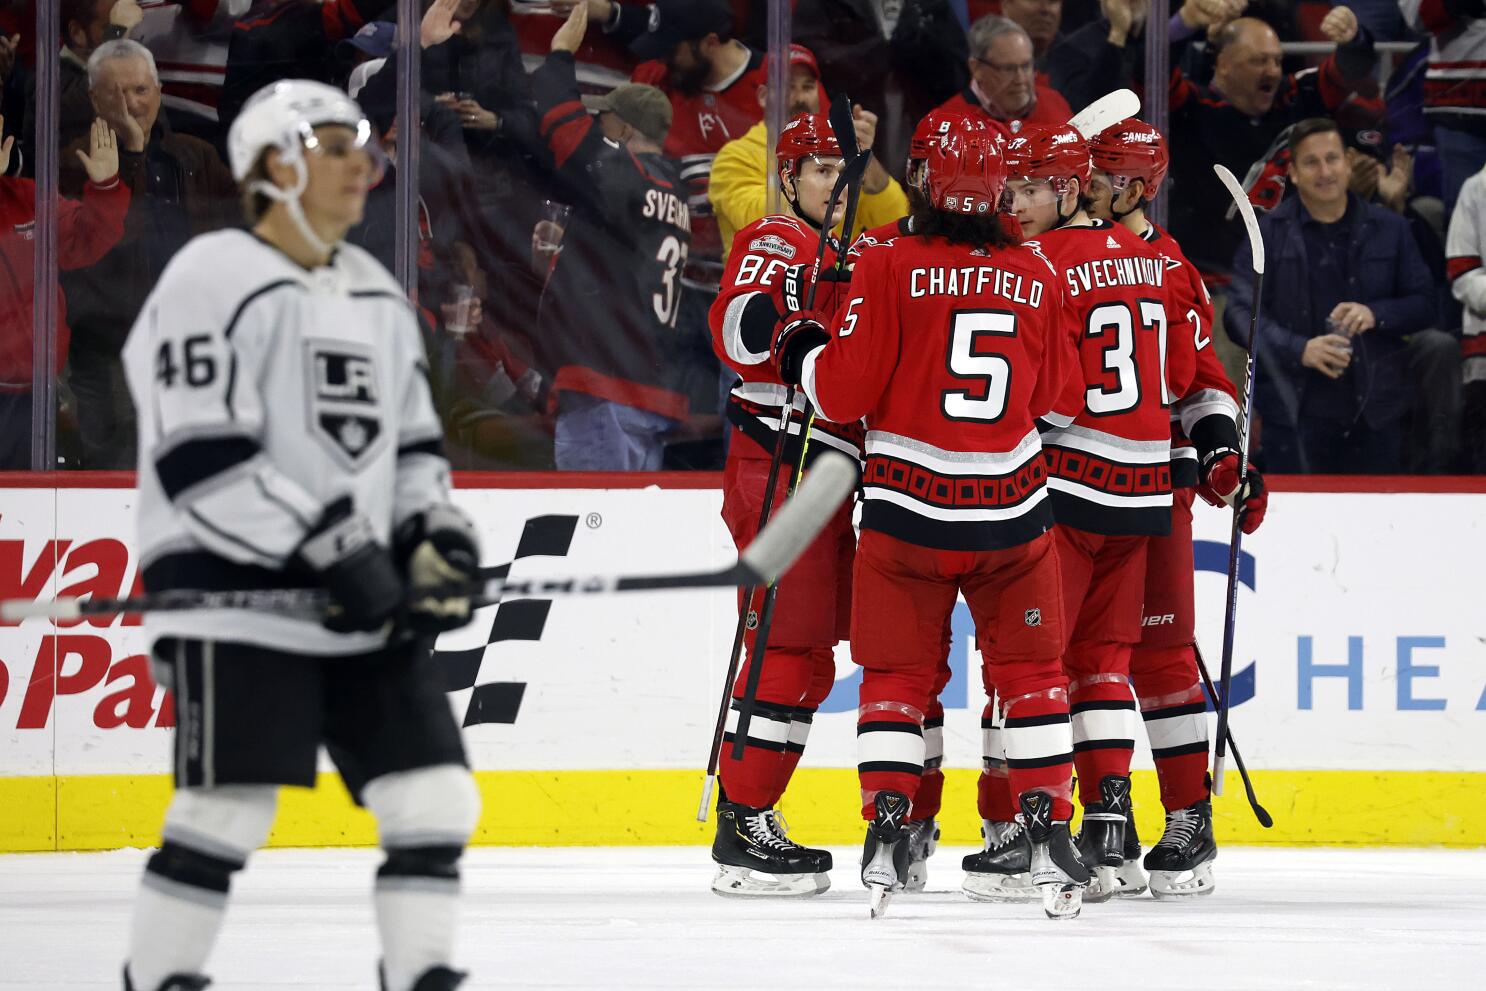 Jordan Staal wins it in OT, 'Canes move up 3-2 in the series